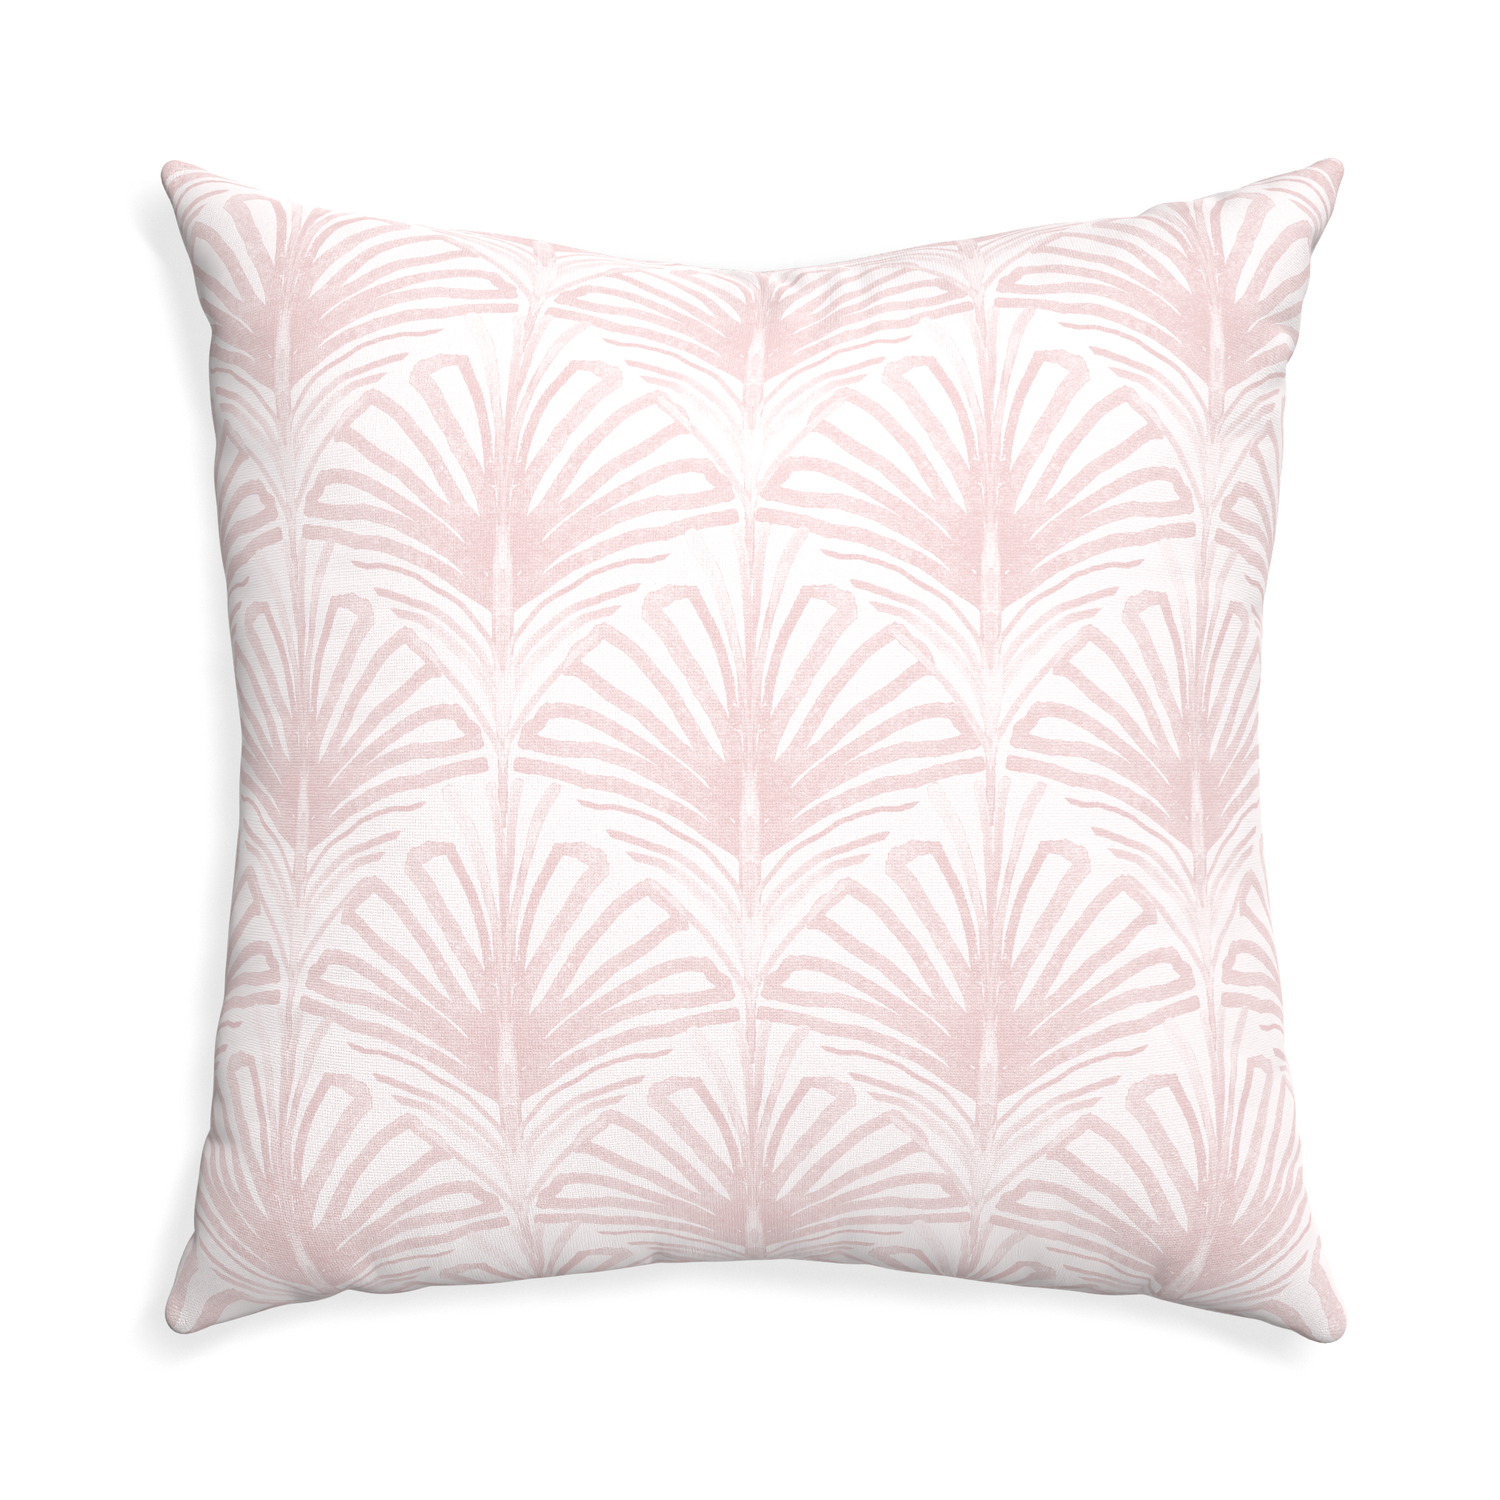 Euro-sham suzy rose custom pillow with none on white background